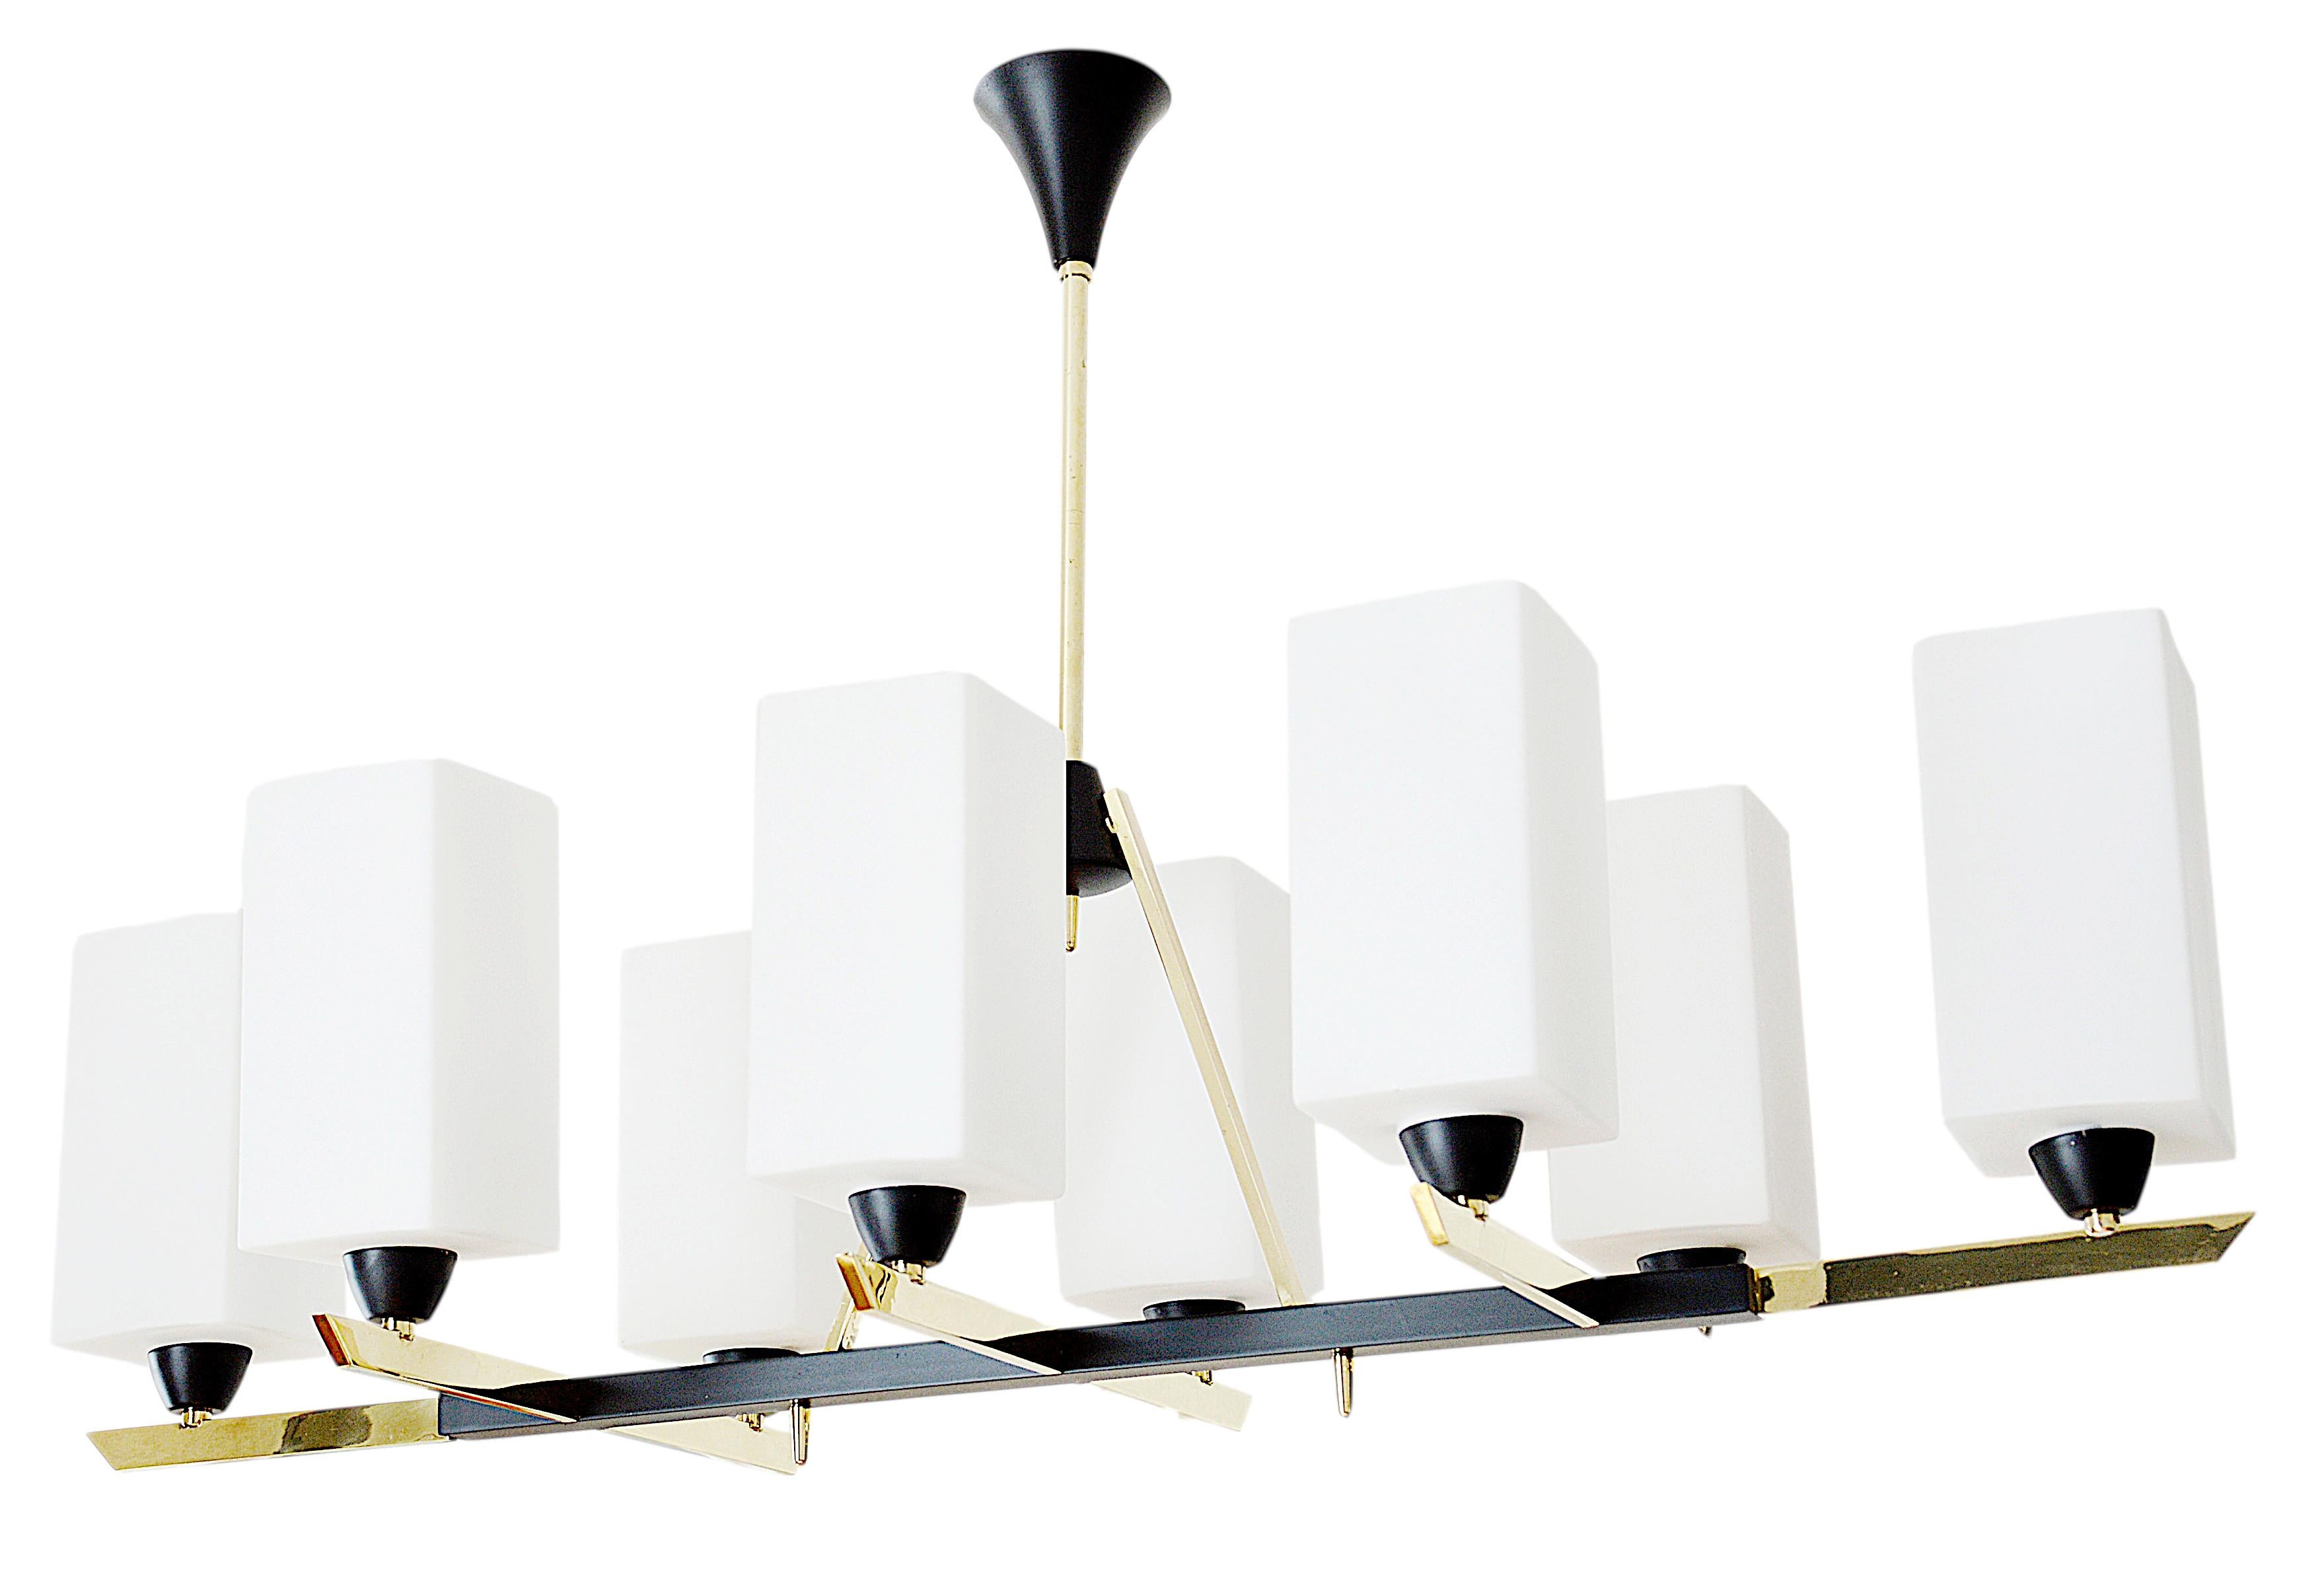 French midcentury chandelier by Arlus (Paris), France, 1950s. Arlus is a lighting brand appearing in the Mad Men series. Same period as Lunel and Stilnovo. 8 large parallelipipedic white glass shades. Brass and painted black metal. Measures: Height